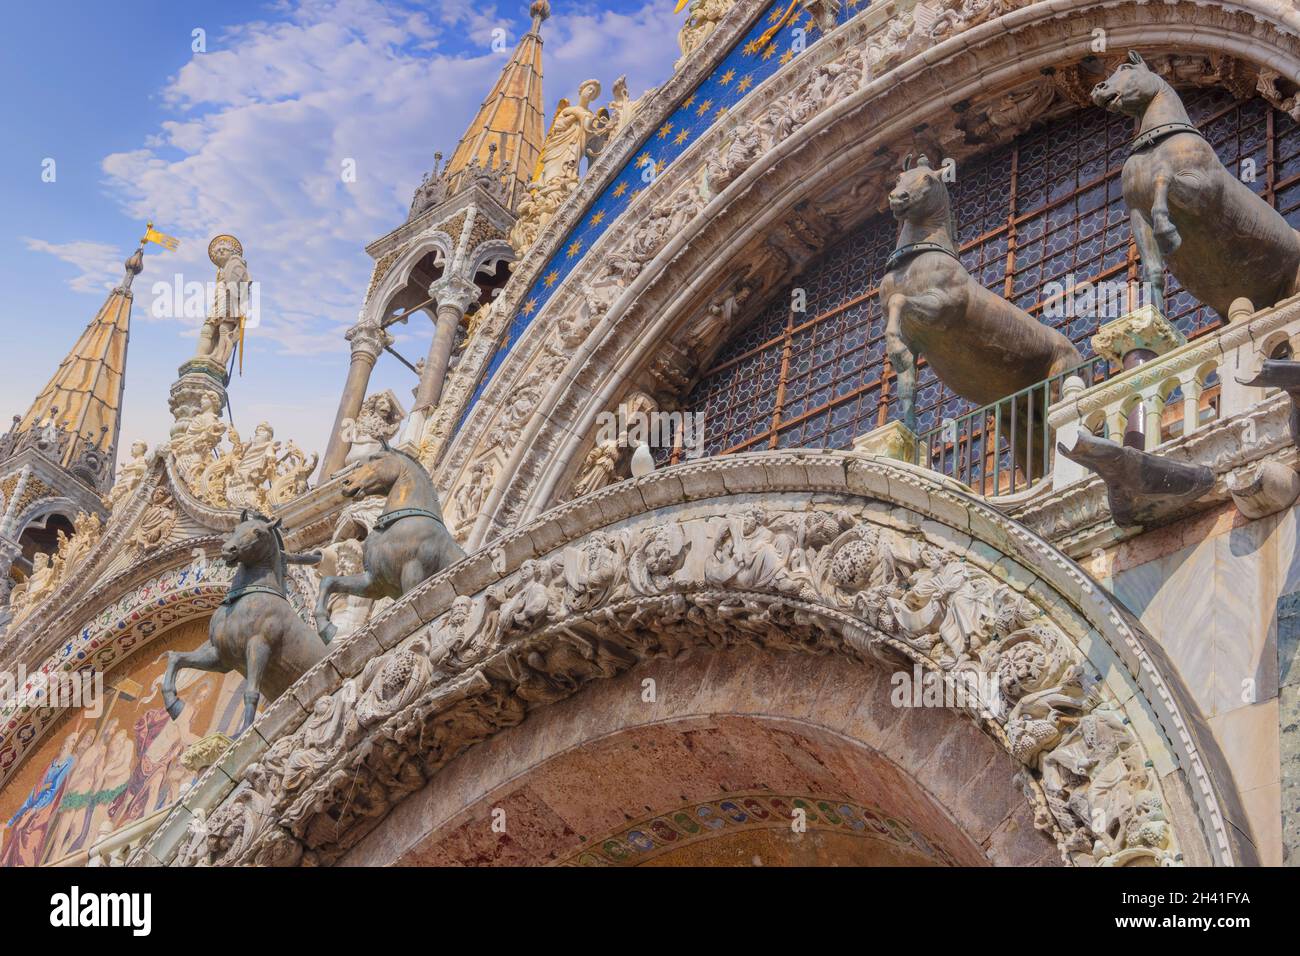 The Patriarchal Cathedral Basilica of Saint Mark at the Piazza San Marco - St Mark's Square, Venice Italy. Stock Photo